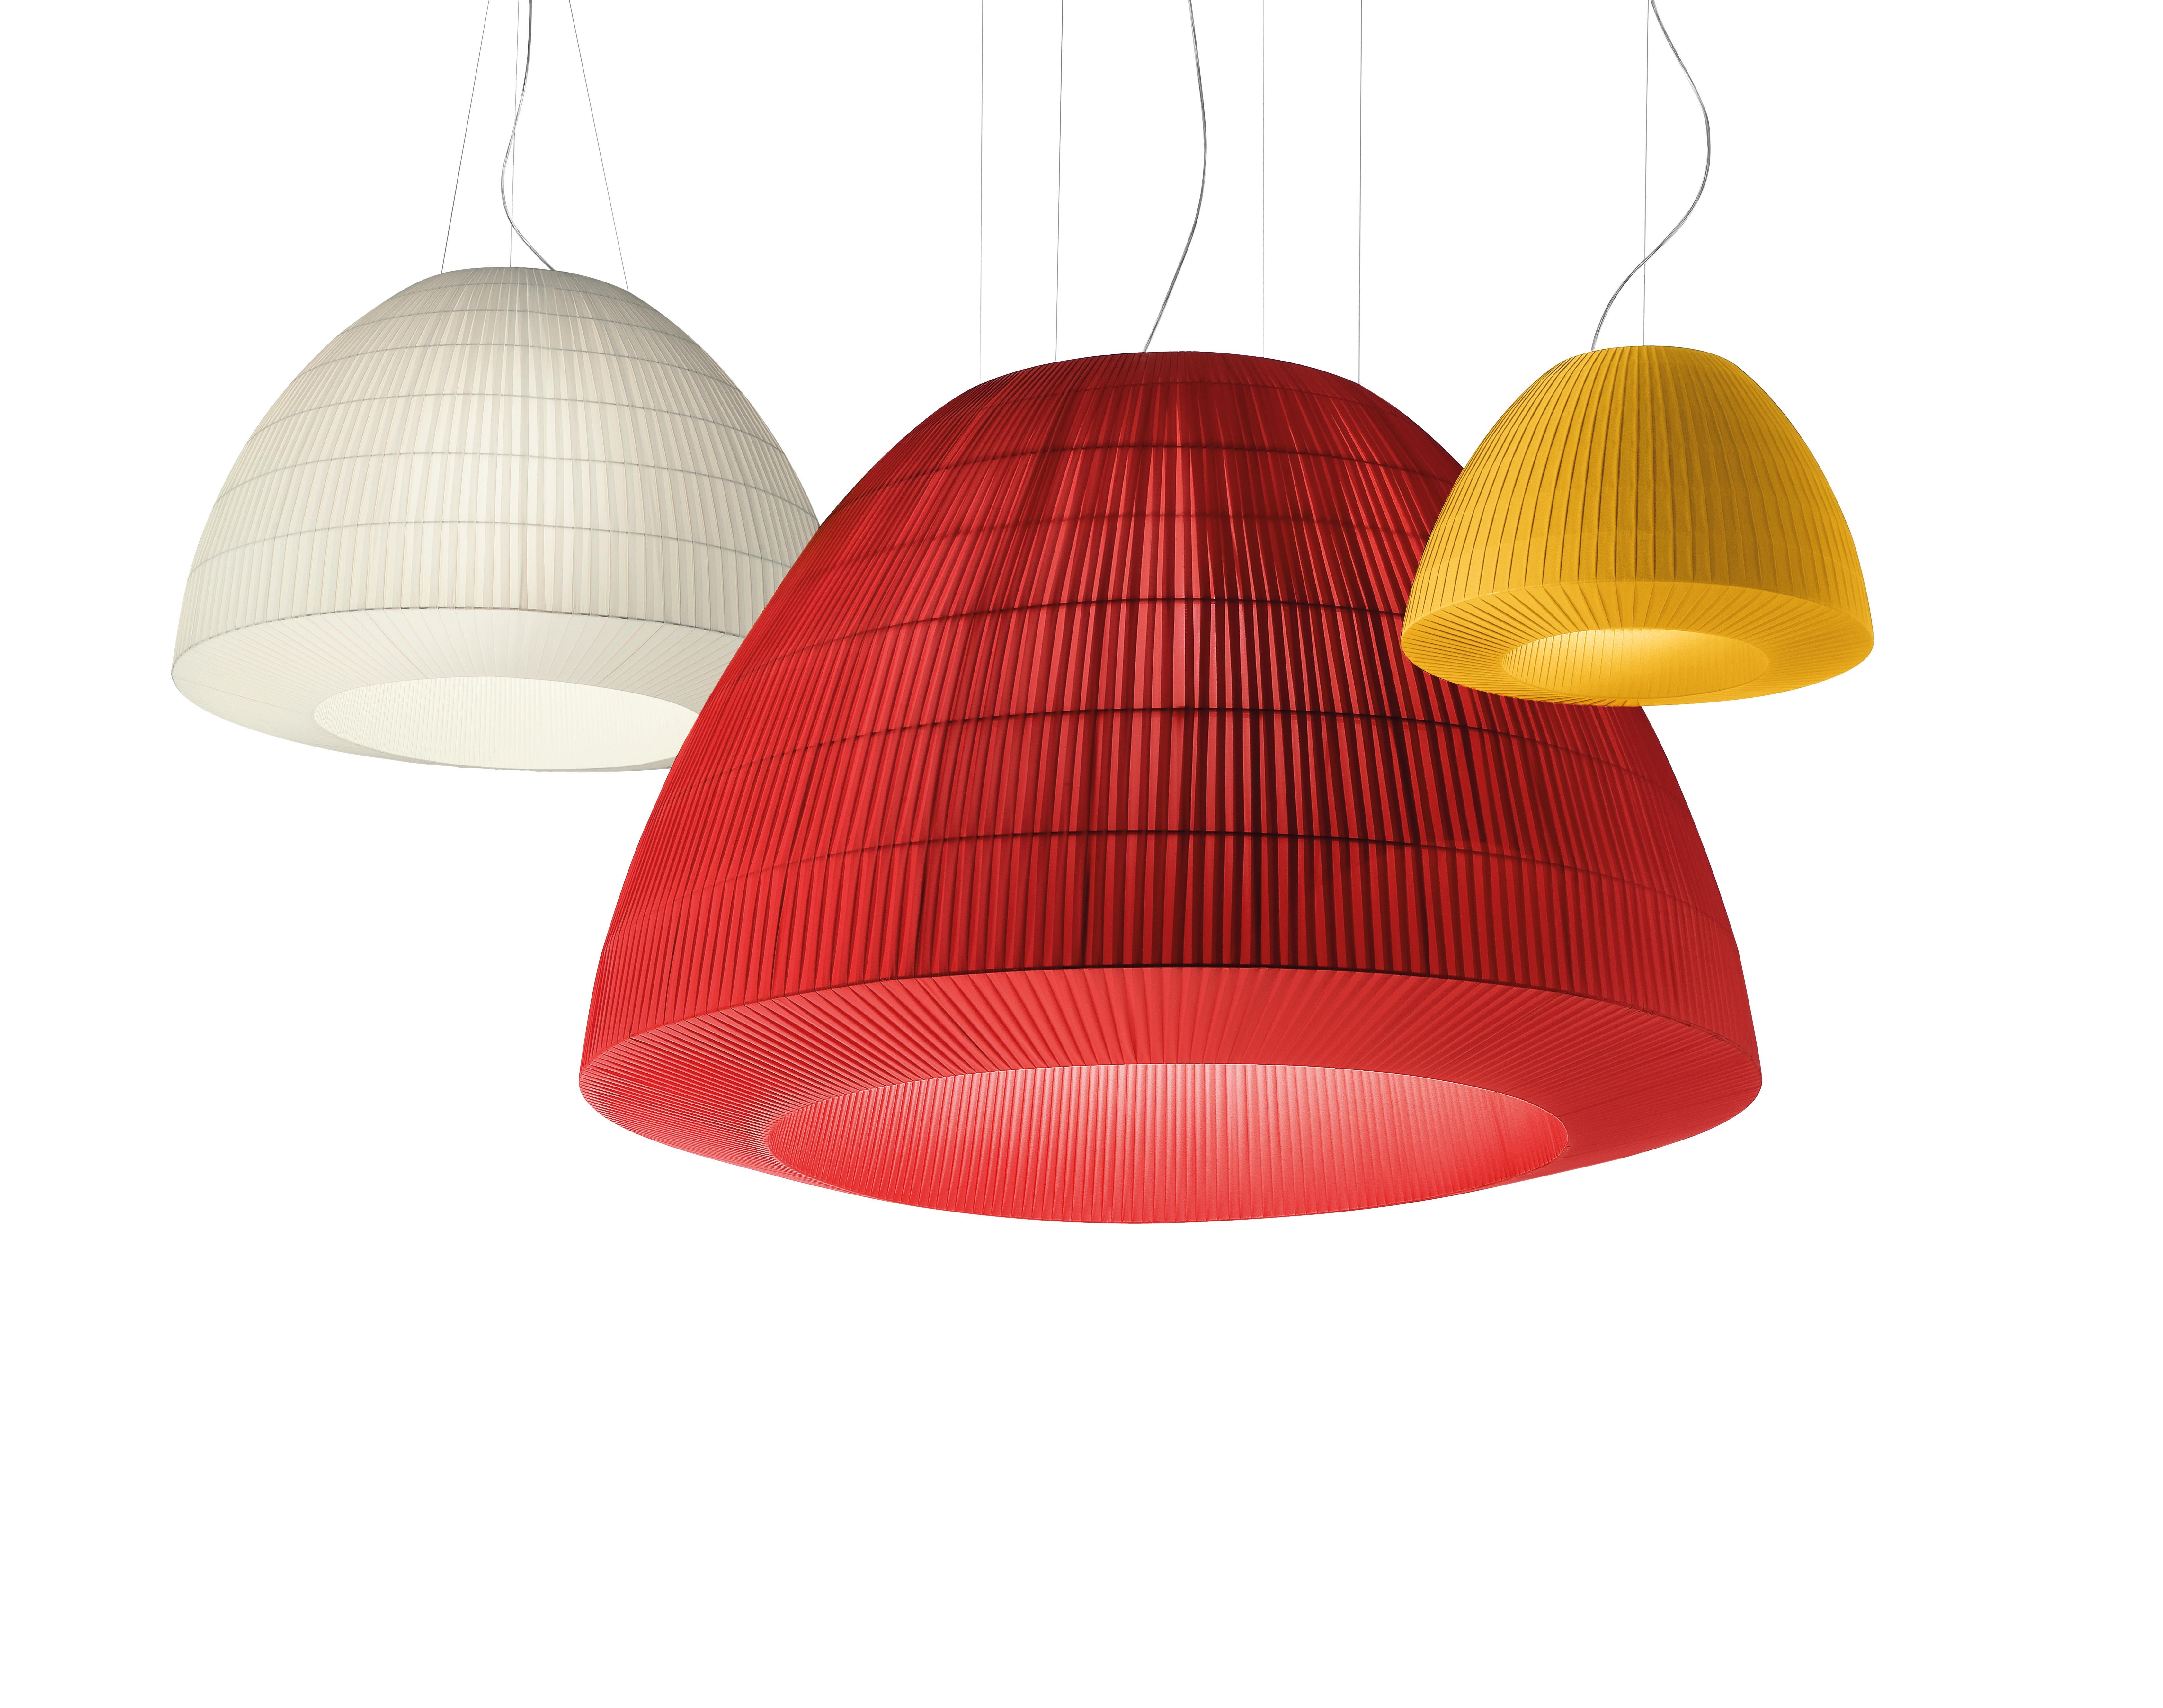 Axolight Bell Extra Large Pendant Lamp in Yellow by Manuel & Vanessa Vivian

The ceiling version of Bell is in continuity with the aesthetic of the pendant one. The lightness given by the fabric, the multidimensionality and the chromatic variations